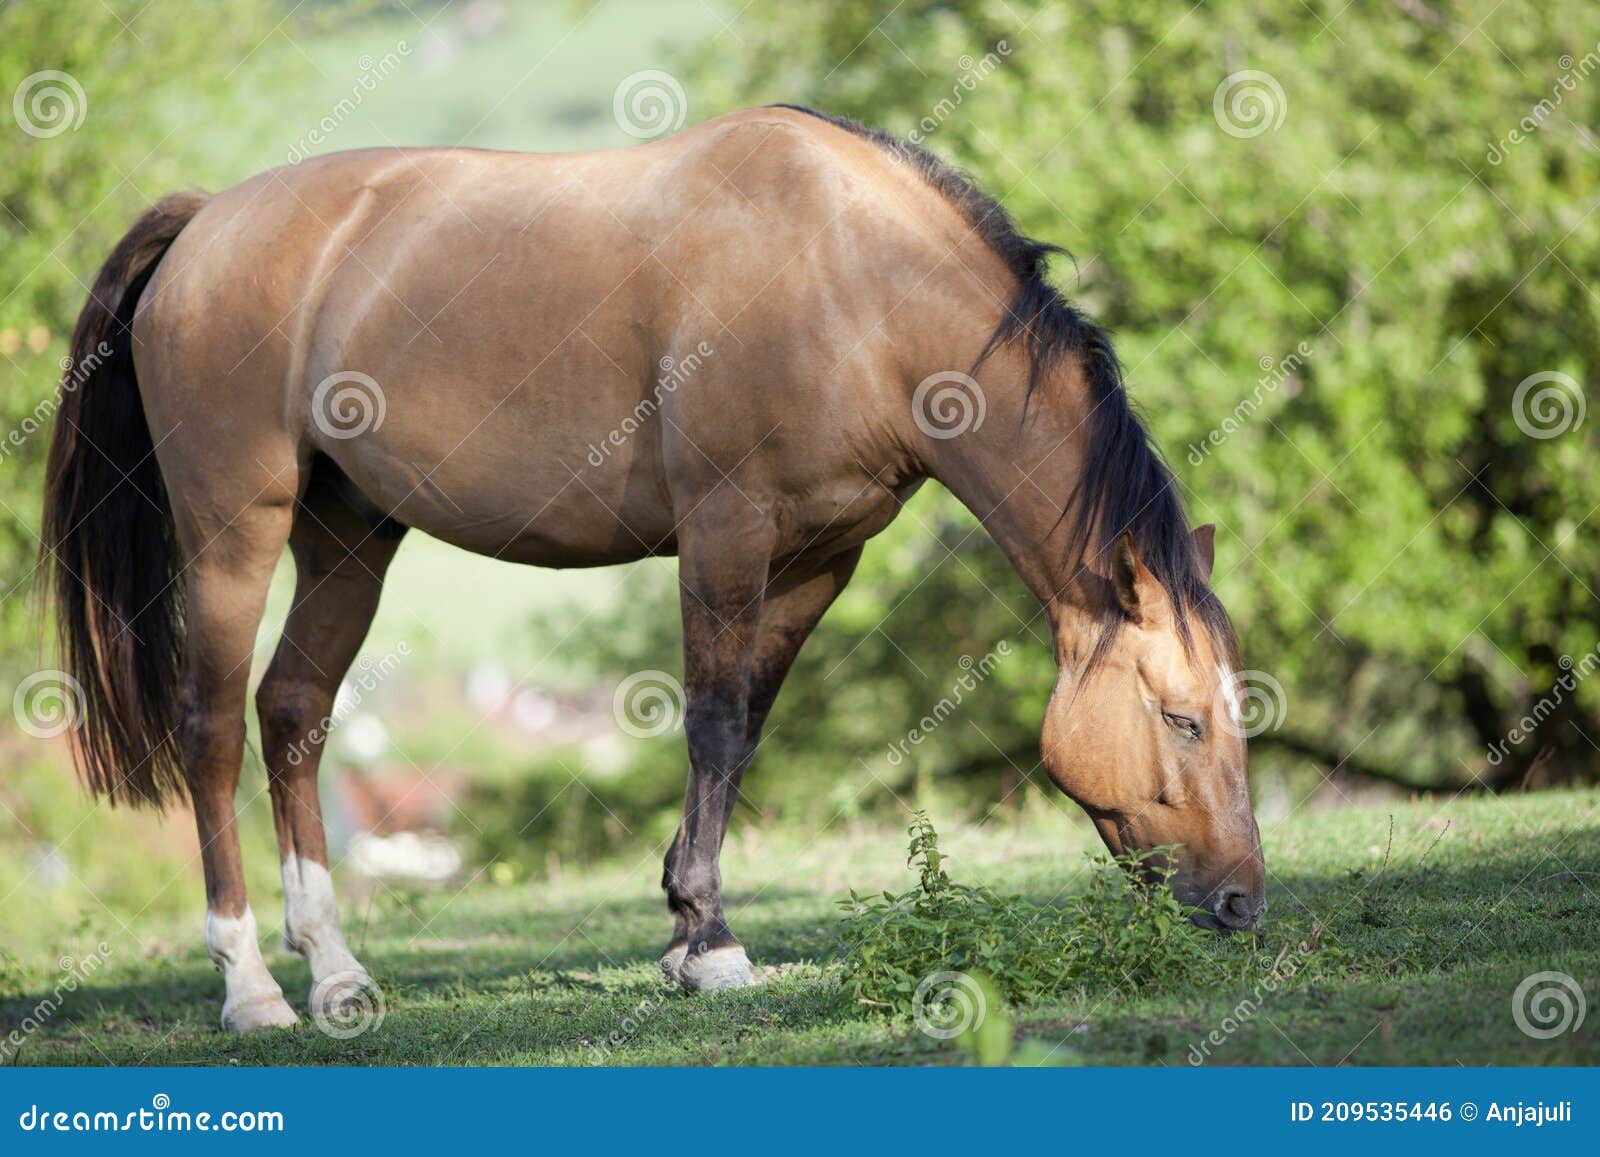 criollo horse breed run free in meadow under green trees